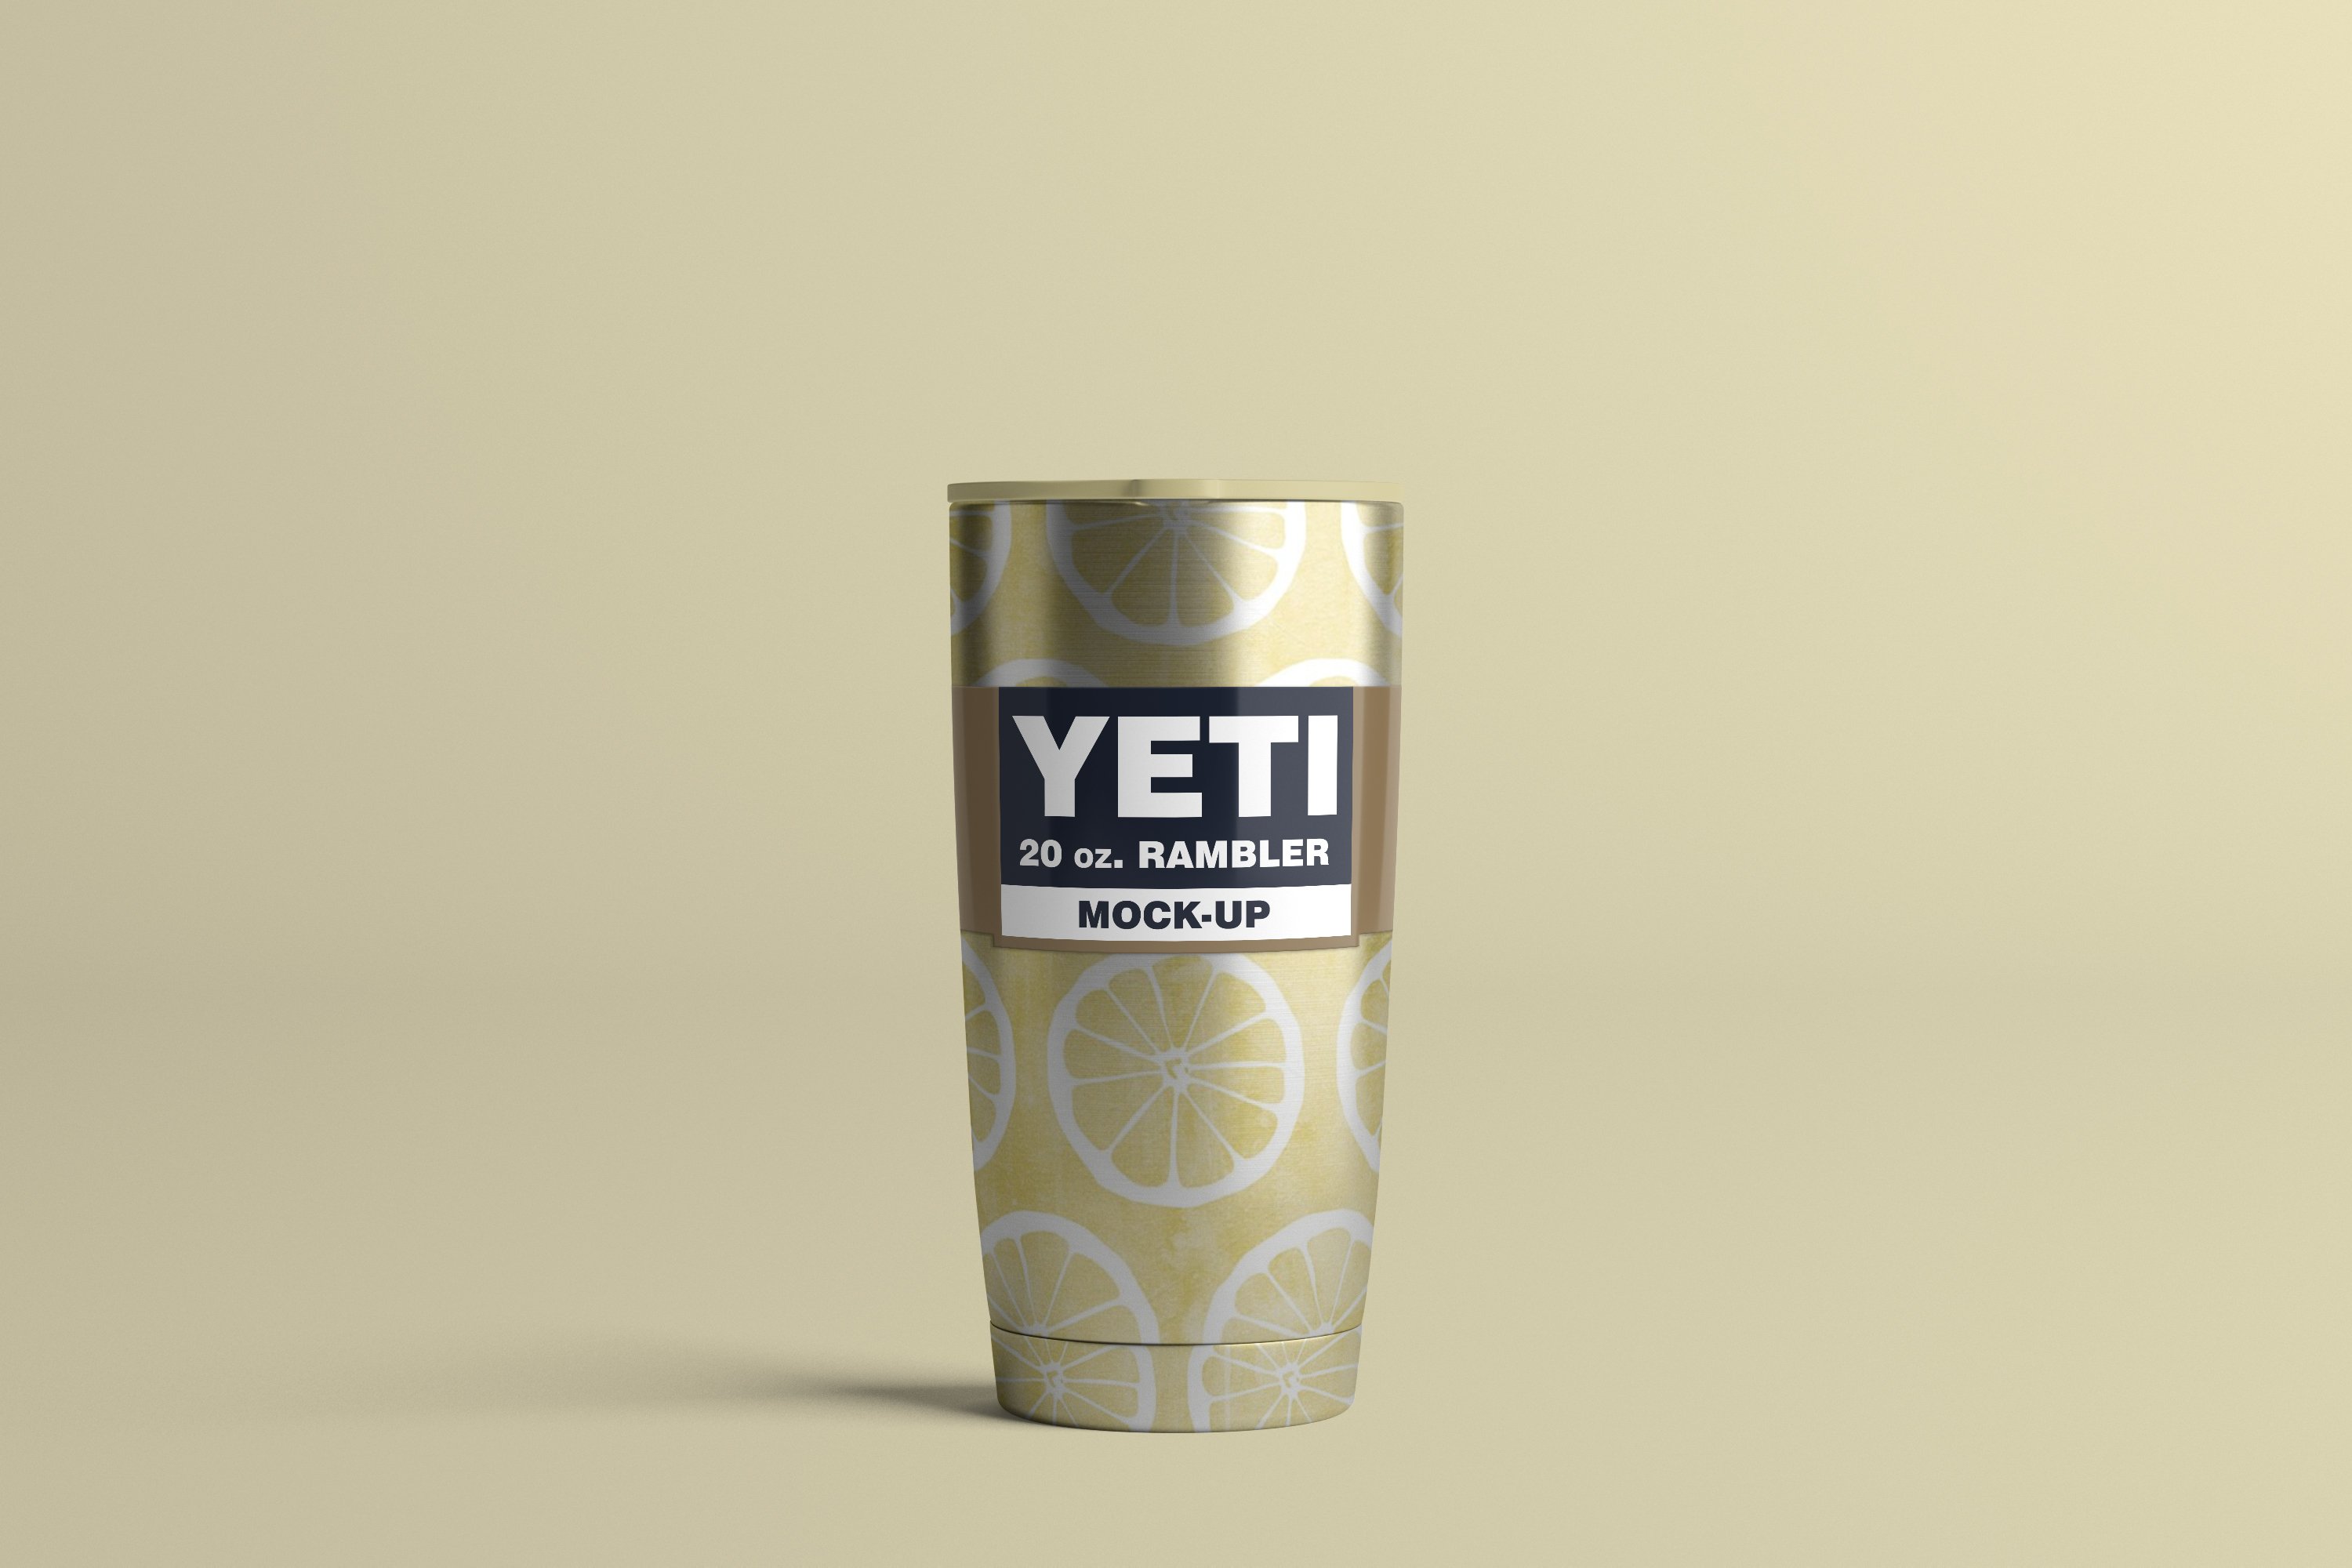 Classic metal yeti cup in gold with lemon prints.